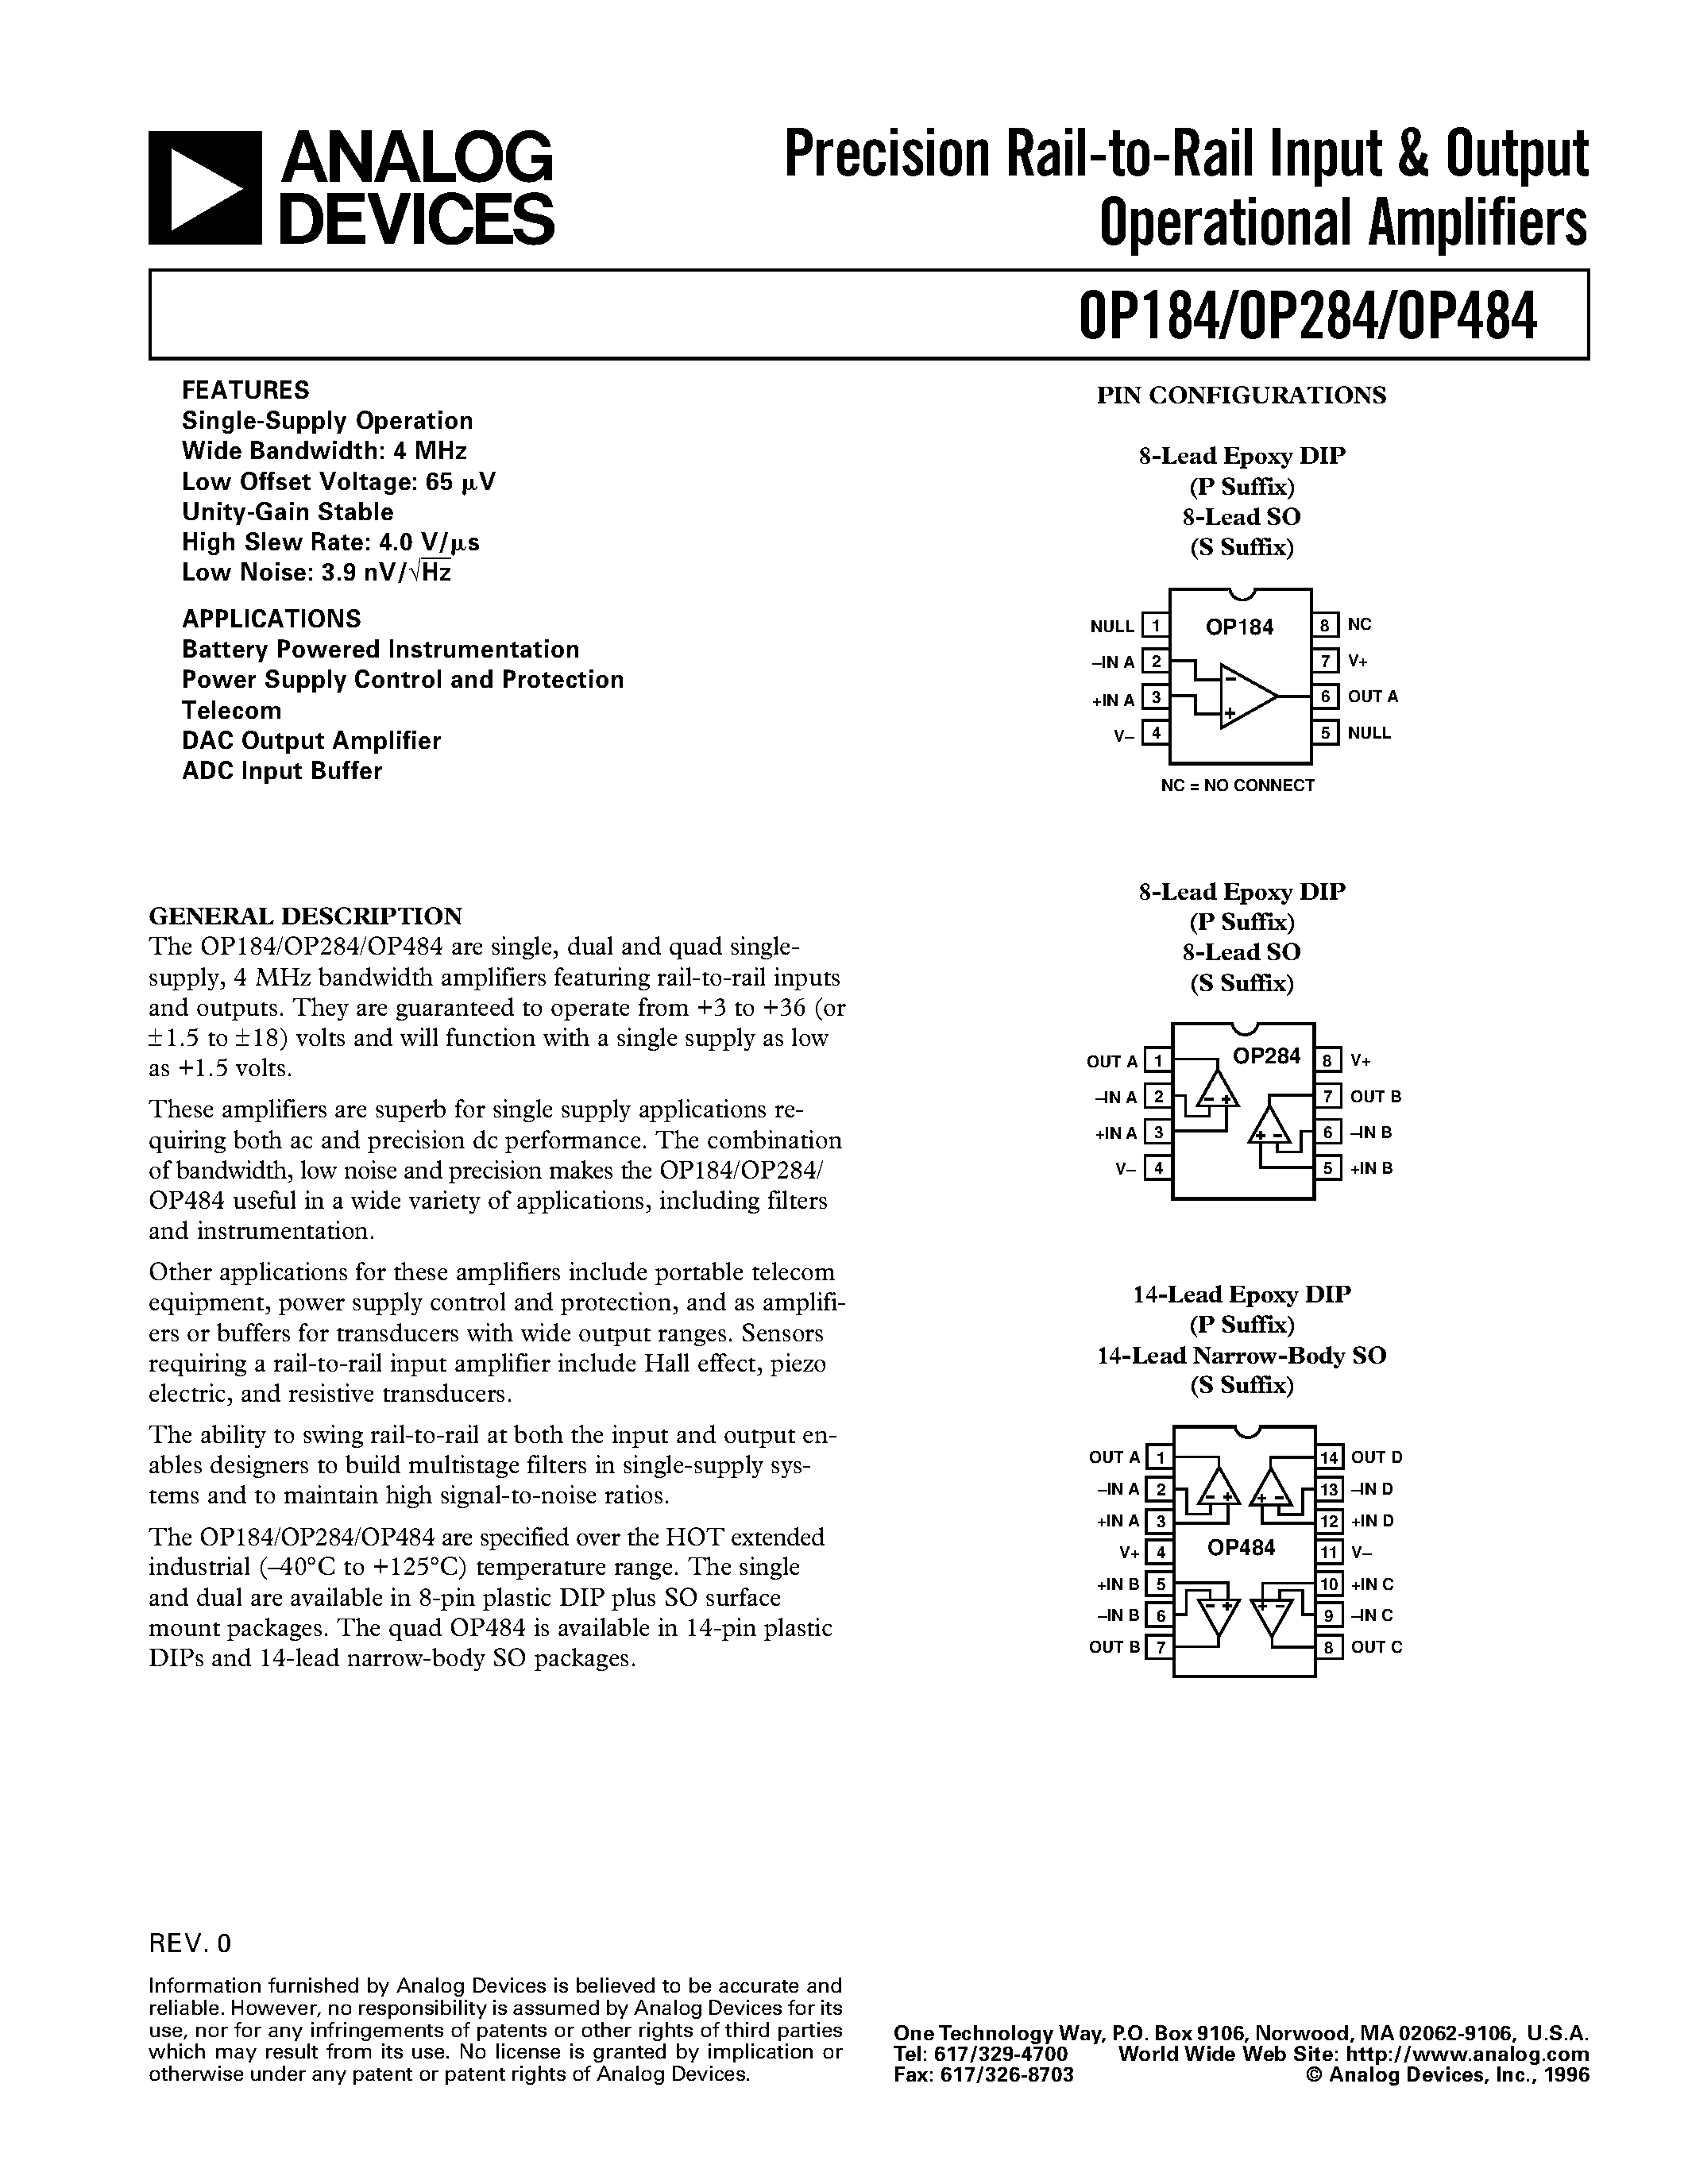 Datasheet OP184 - Precision Rail-to-Rail Input & Output Operational Amplifiers page 1